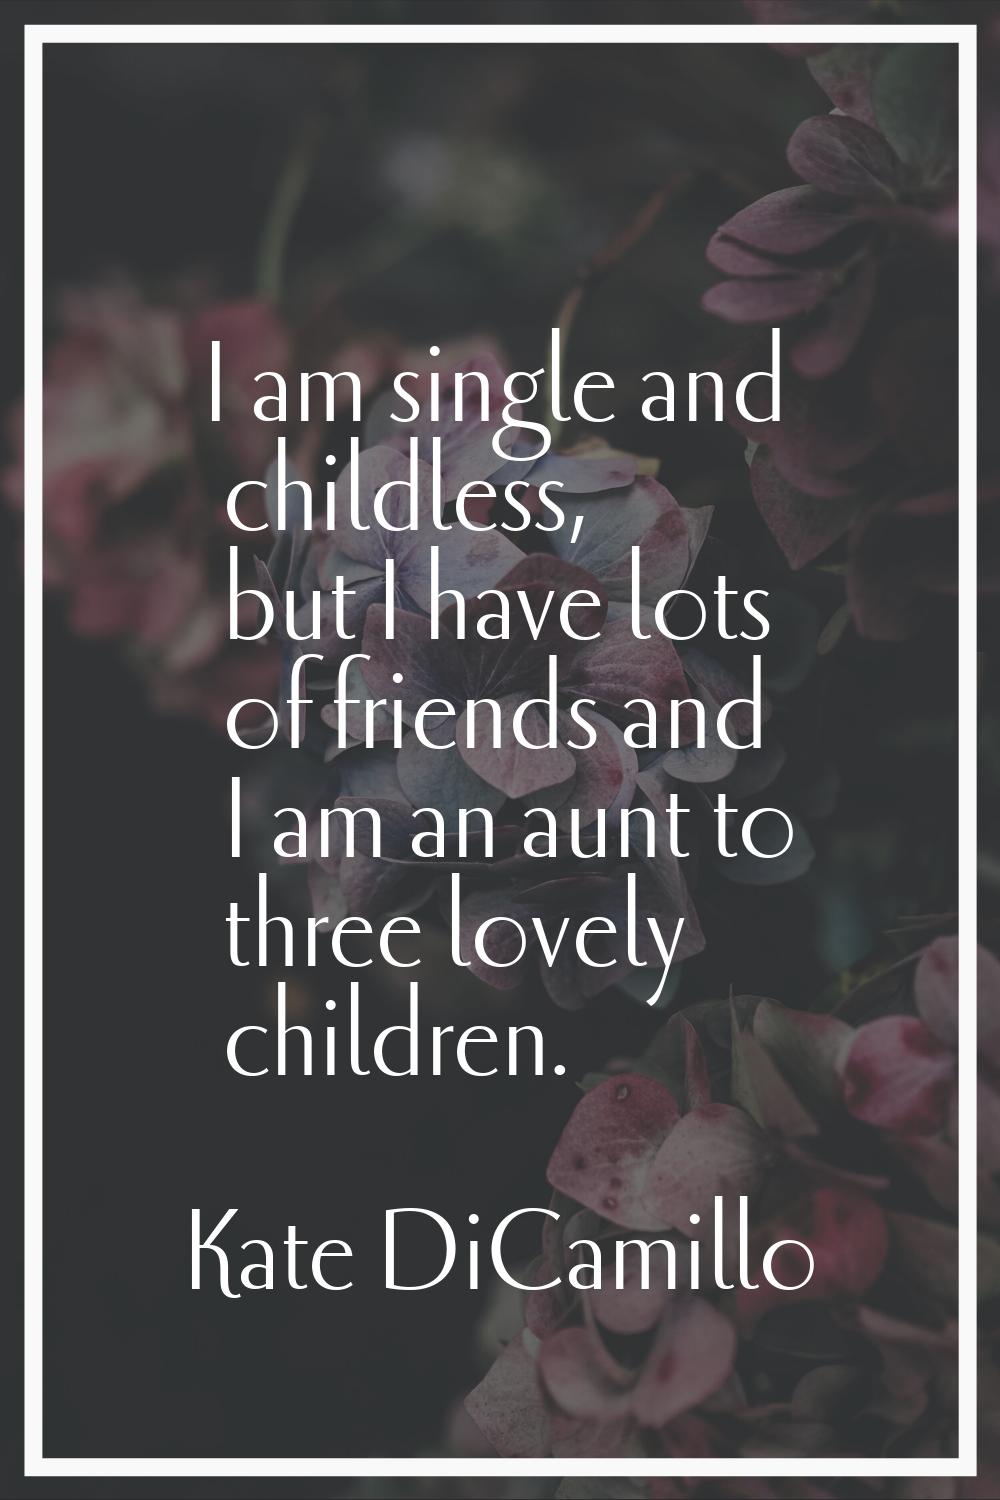 I am single and childless, but I have lots of friends and I am an aunt to three lovely children.